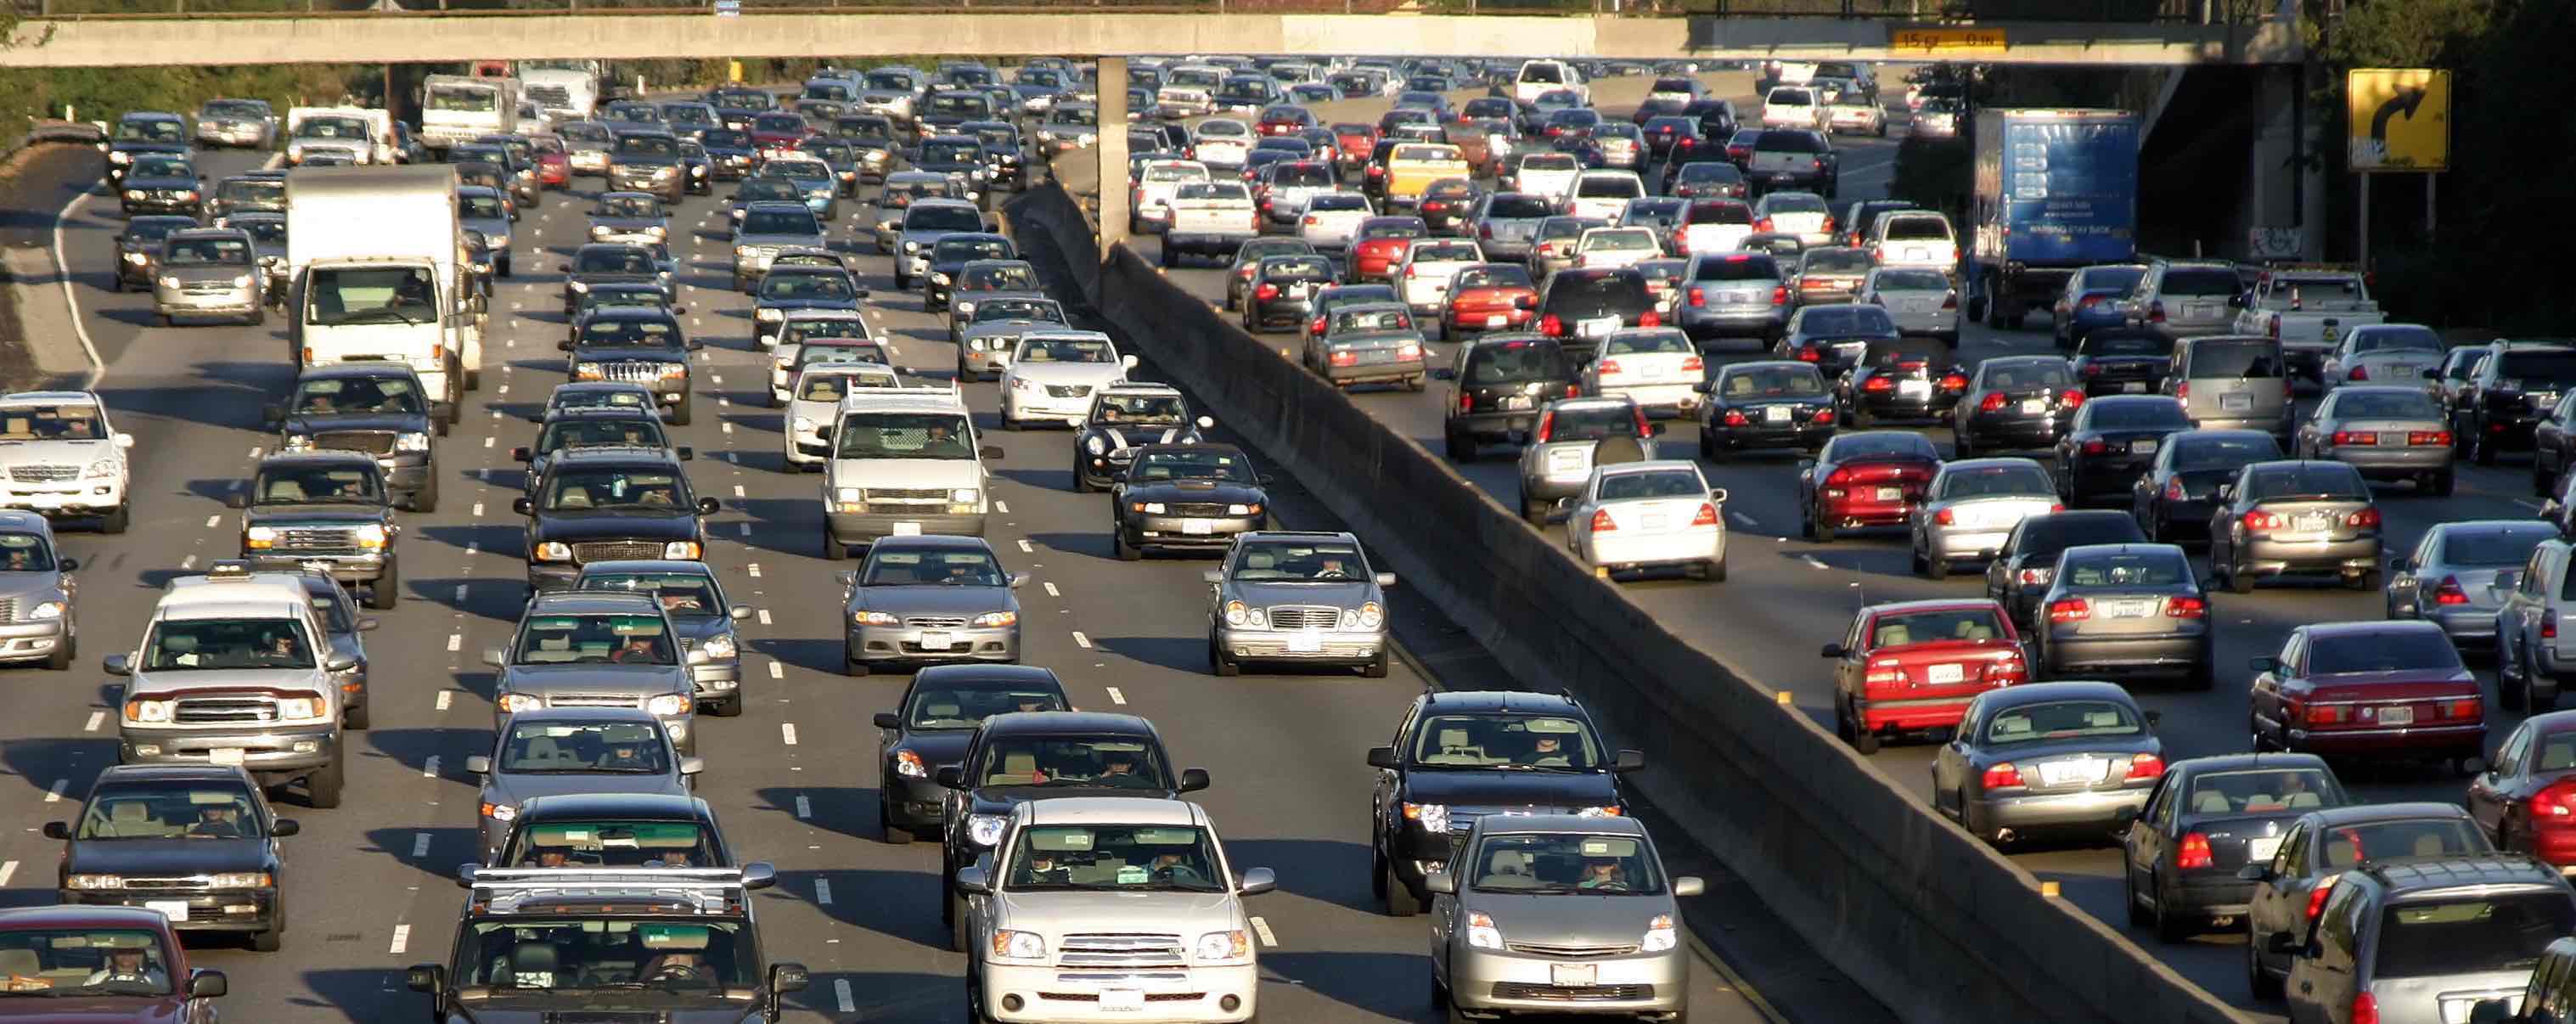 How to Beat the LA Commute, Los Angeles traffic, Traffic problems Los Angeles, How to commute Los Angeles, Los Angeles highway traffic, LA traffic issues